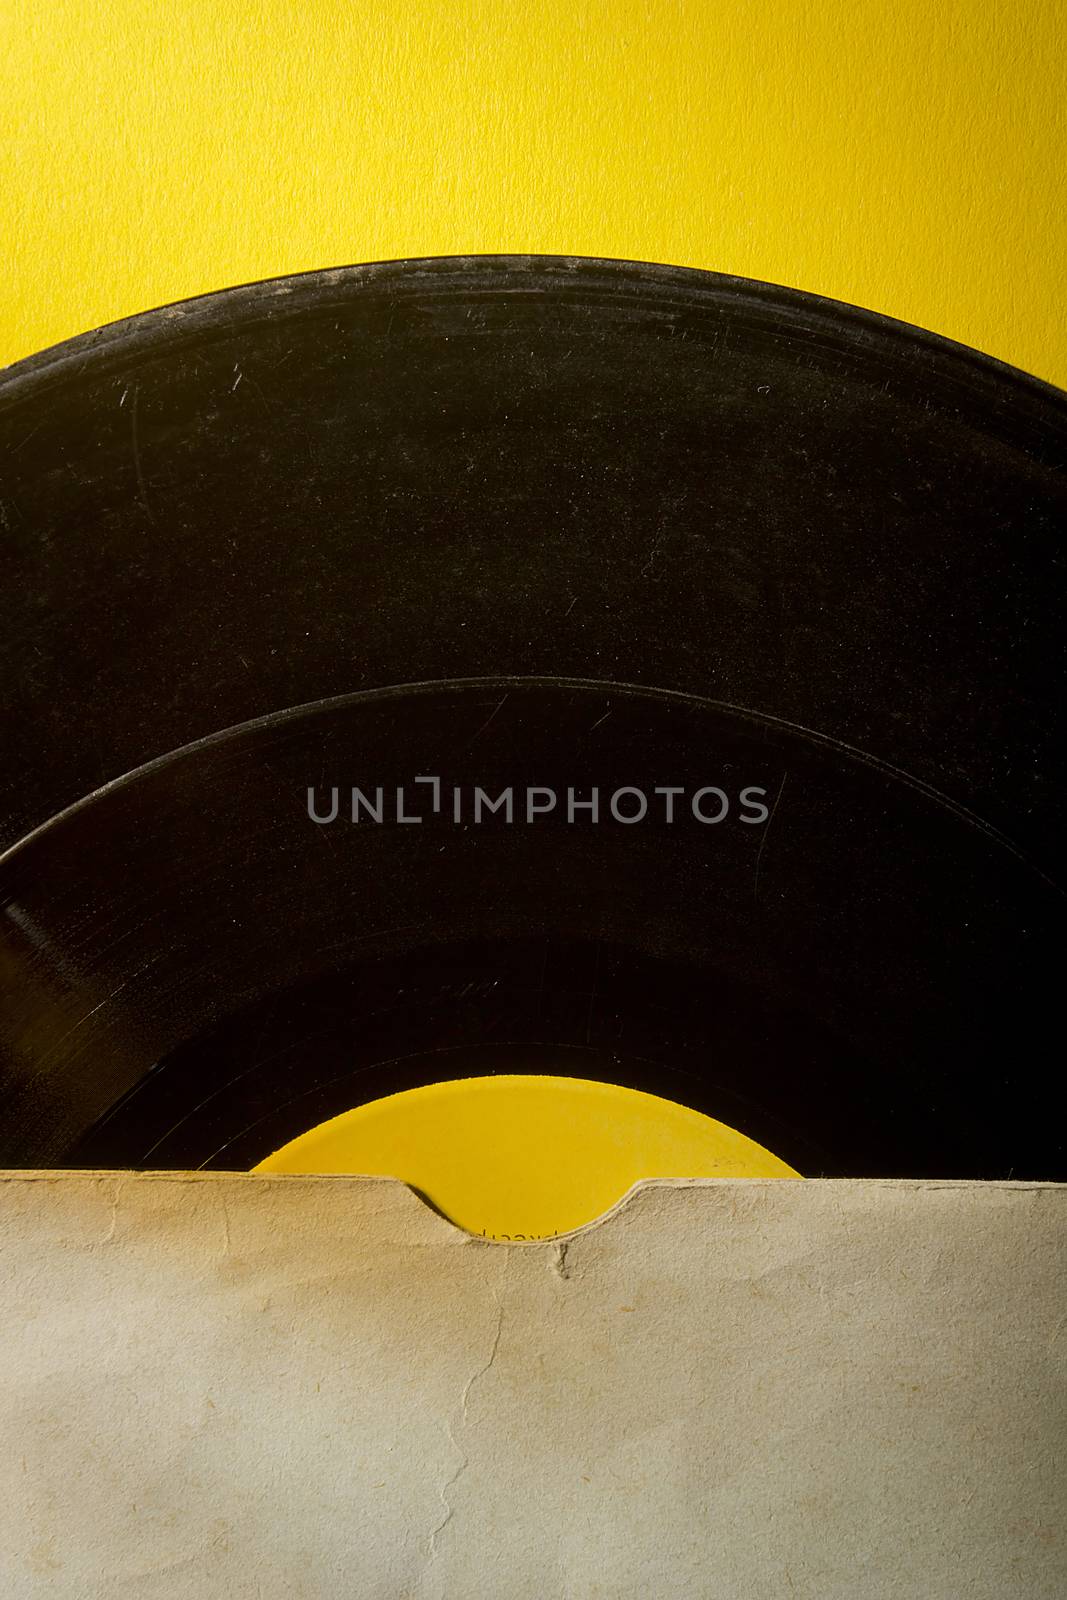 Vinyl record in an envelope on a yellow background